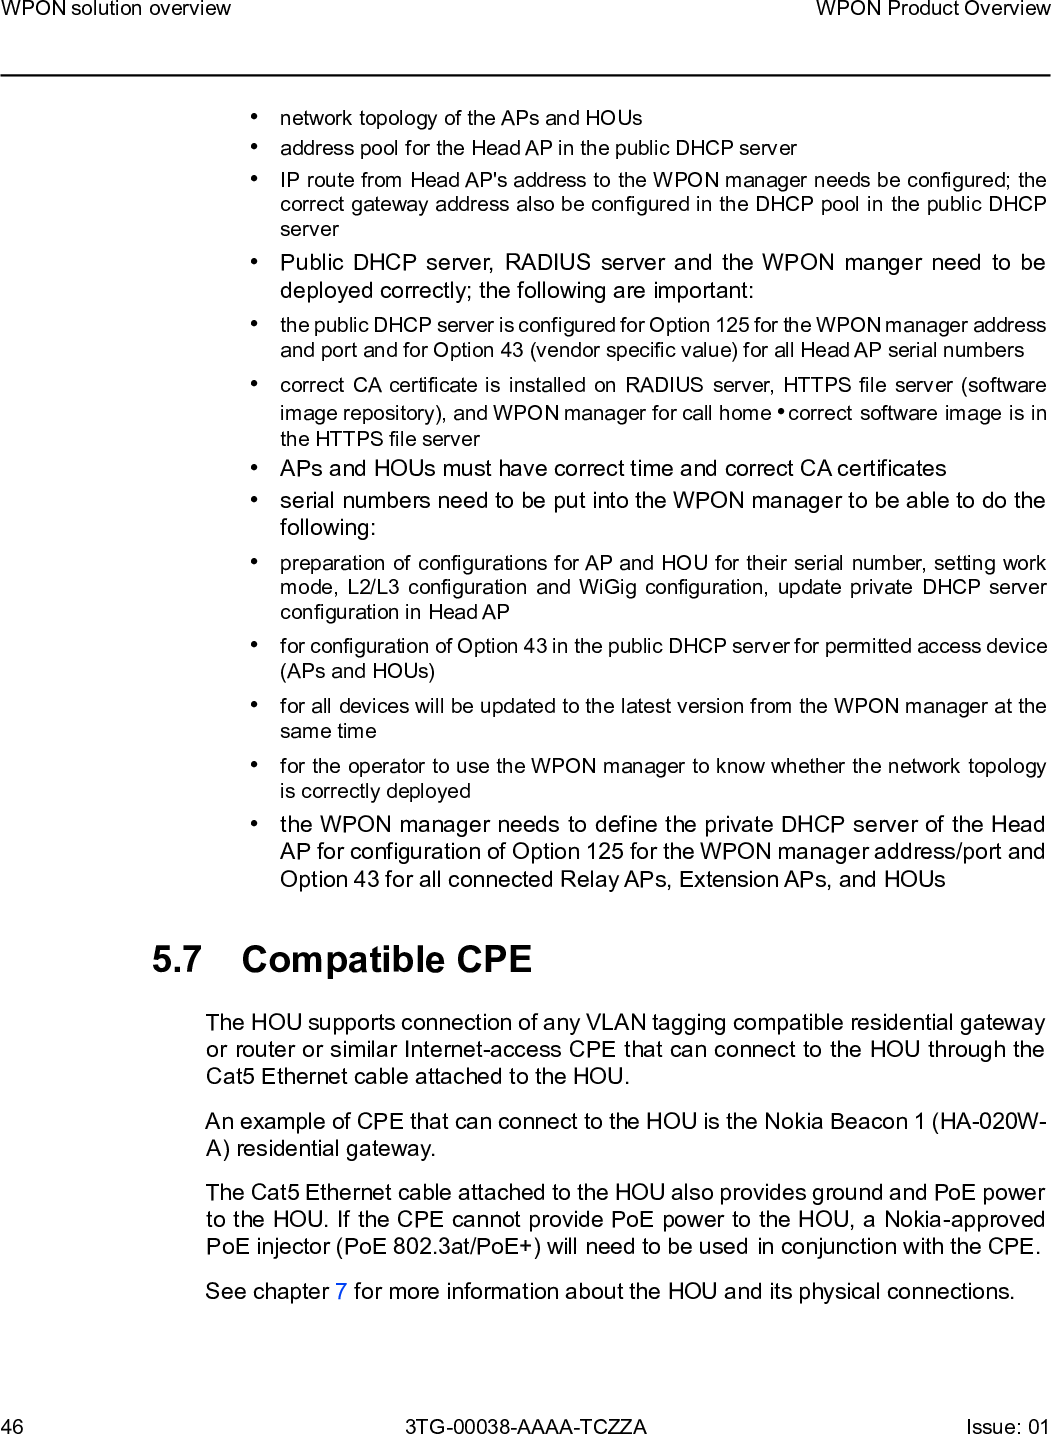 Page 46 of Nokia Bell 7577WPONAPDC WPON User Manual WPON Product Overview